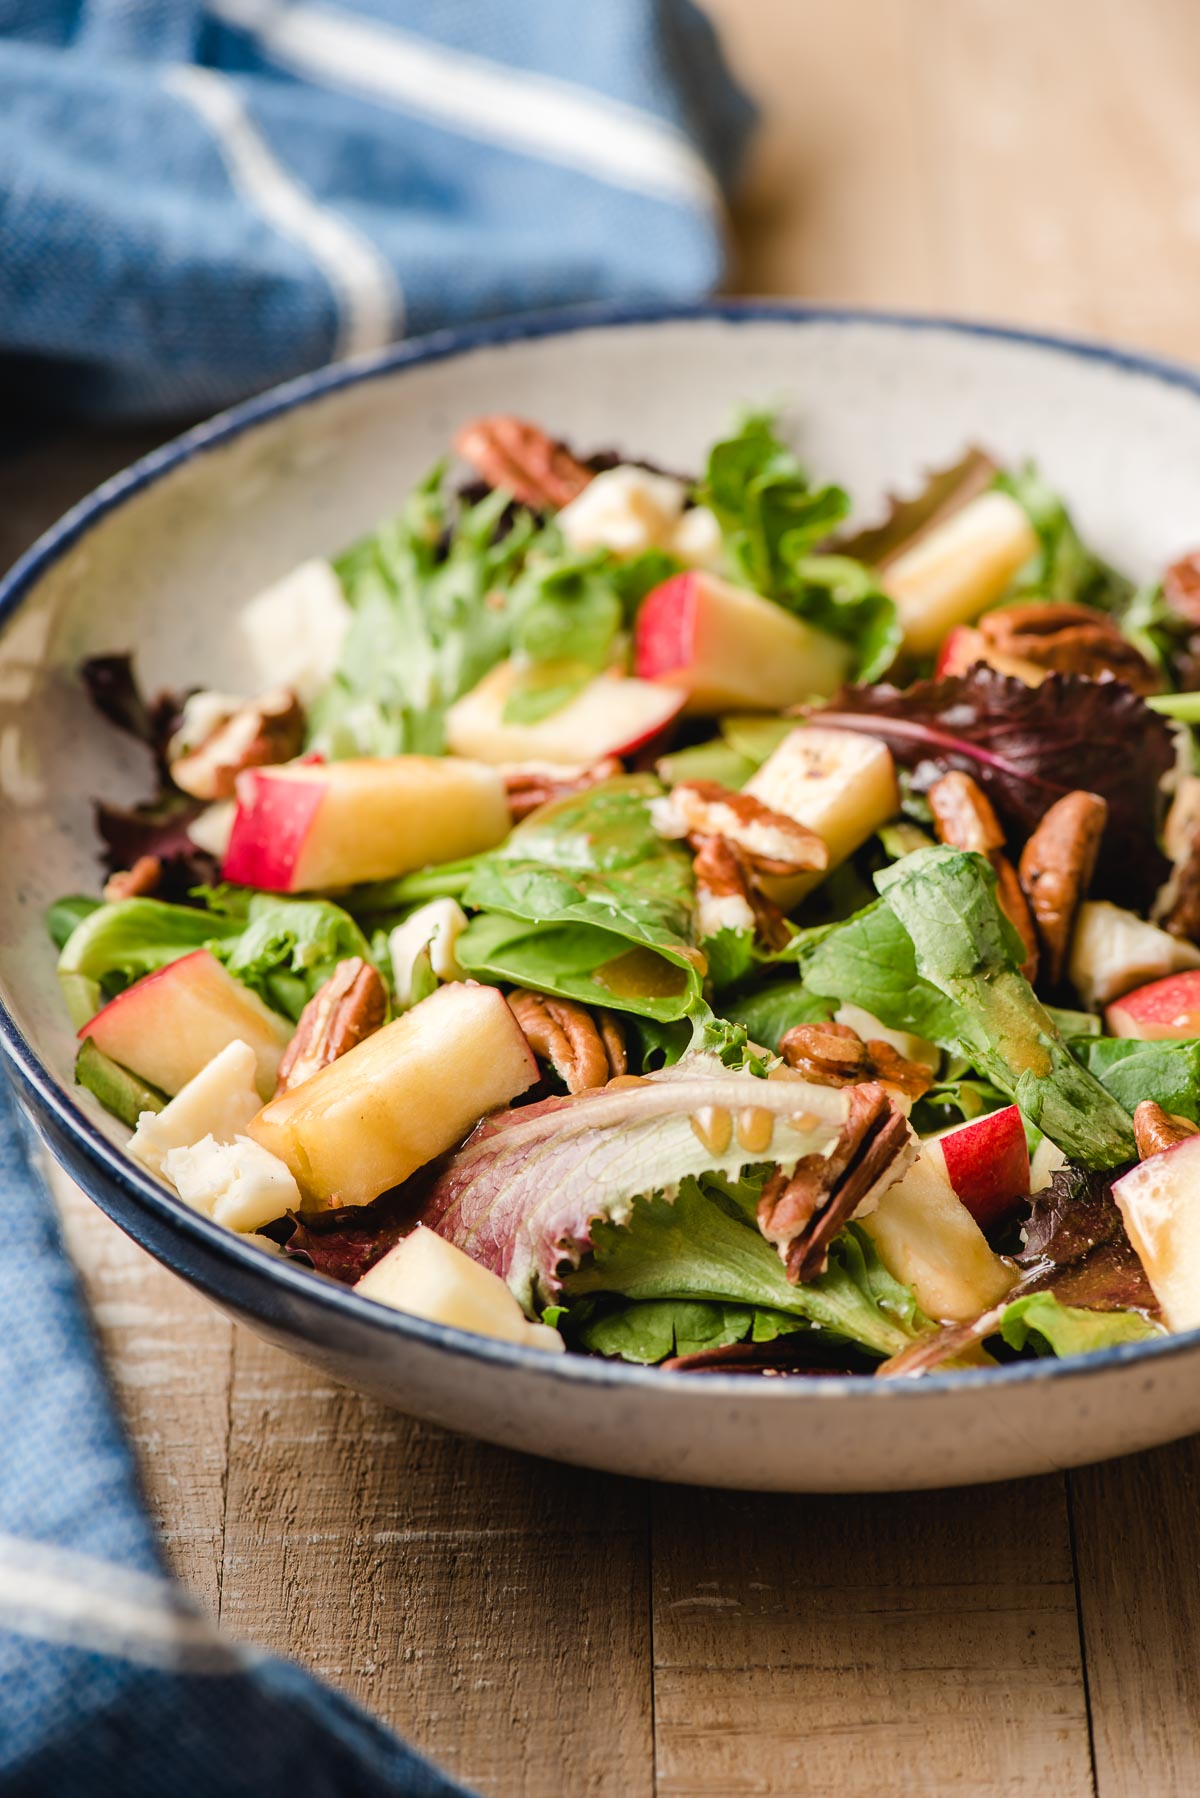 Salad with apples, goat cheese, chicken, and maple dressing.